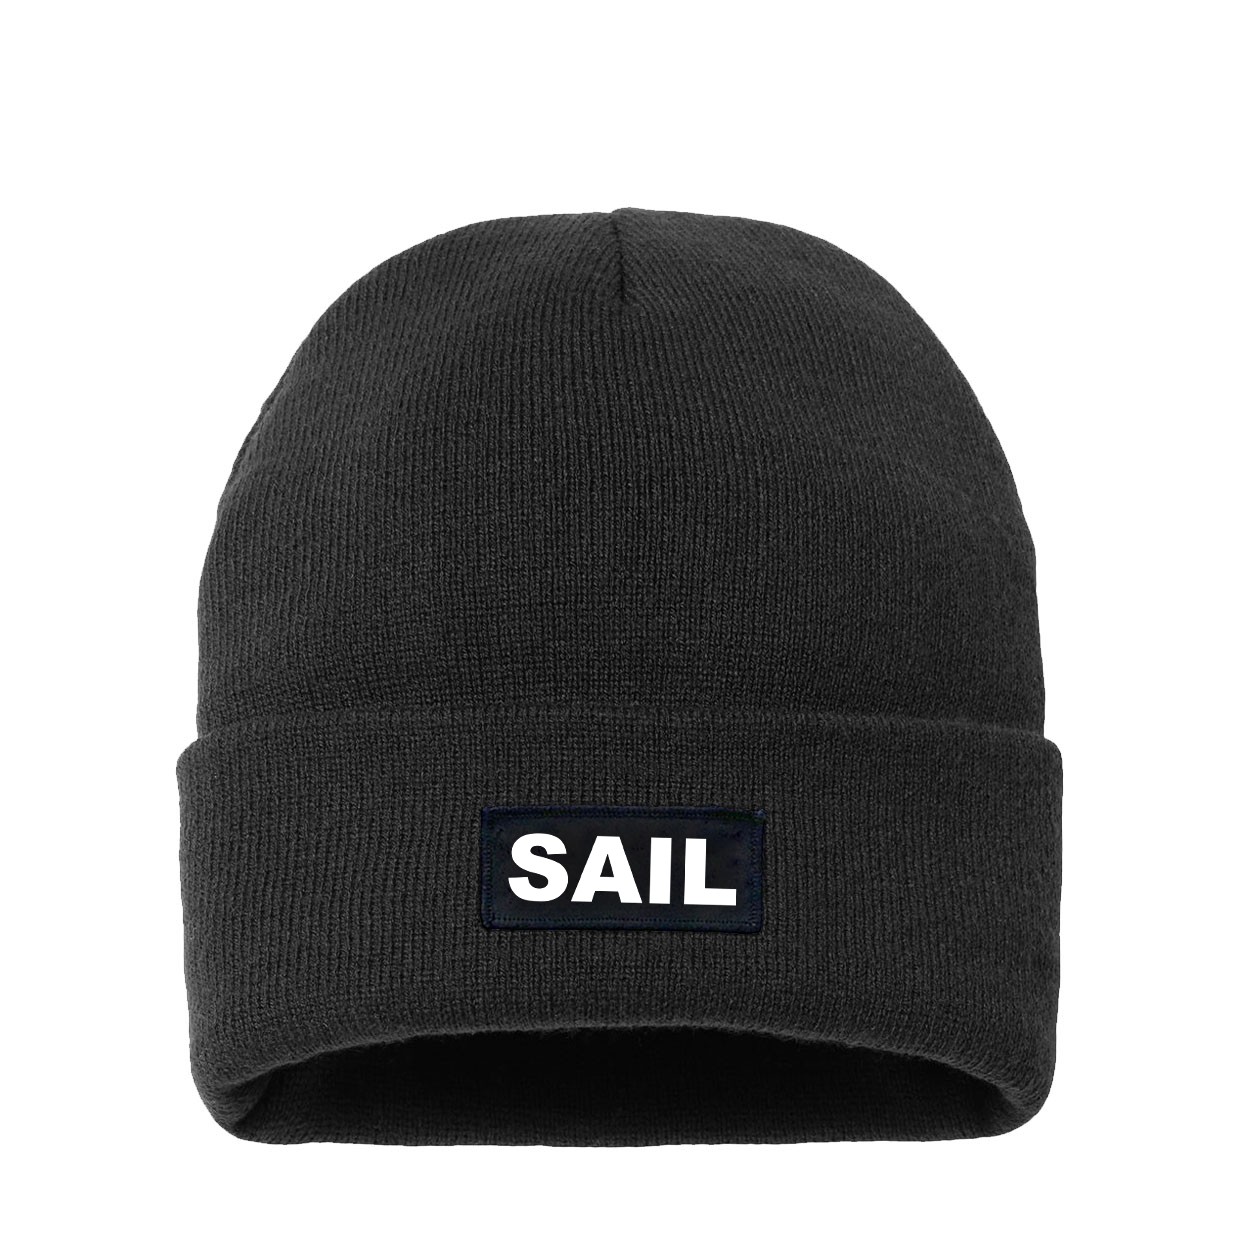 Sail Brand Logo Night Out Woven Patch Night Out Sherpa Lined Cuffed Beanie Black